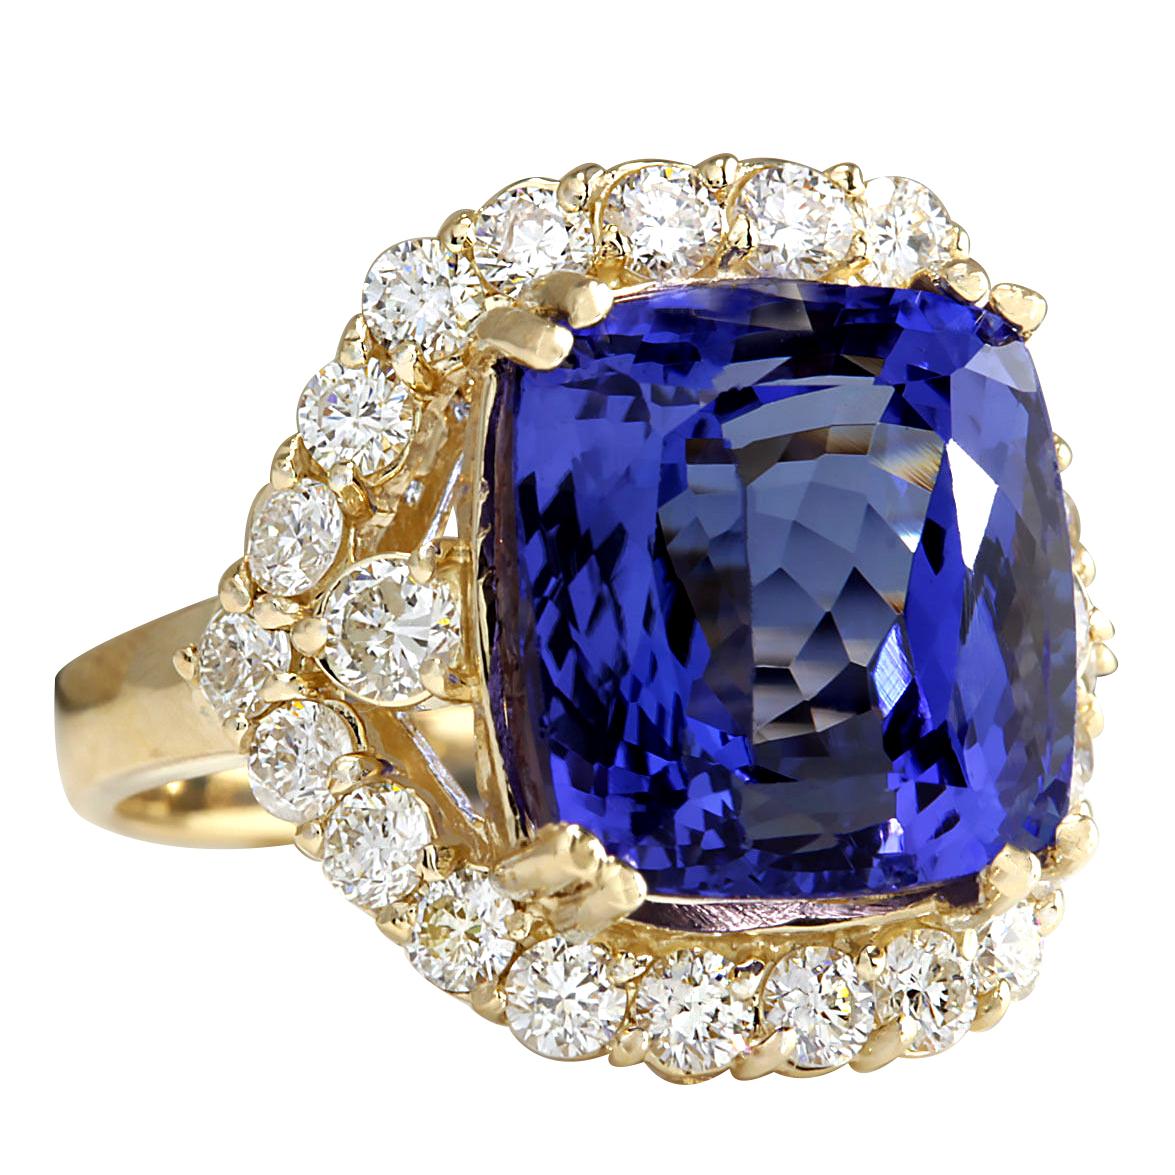 Stamped: 14K Yellow Gold
Total Ring Weight: 8.0 Grams
Total Natural Tanzanite Weight is 13.18 Carat (Measures: 13.00x11.00 mm)
Color: Blue
Diamond Weight: Total Natural Diamond Weight is 1.50 Carat
Color: F-G, Clarity: VS2-SI1
Face Measures: